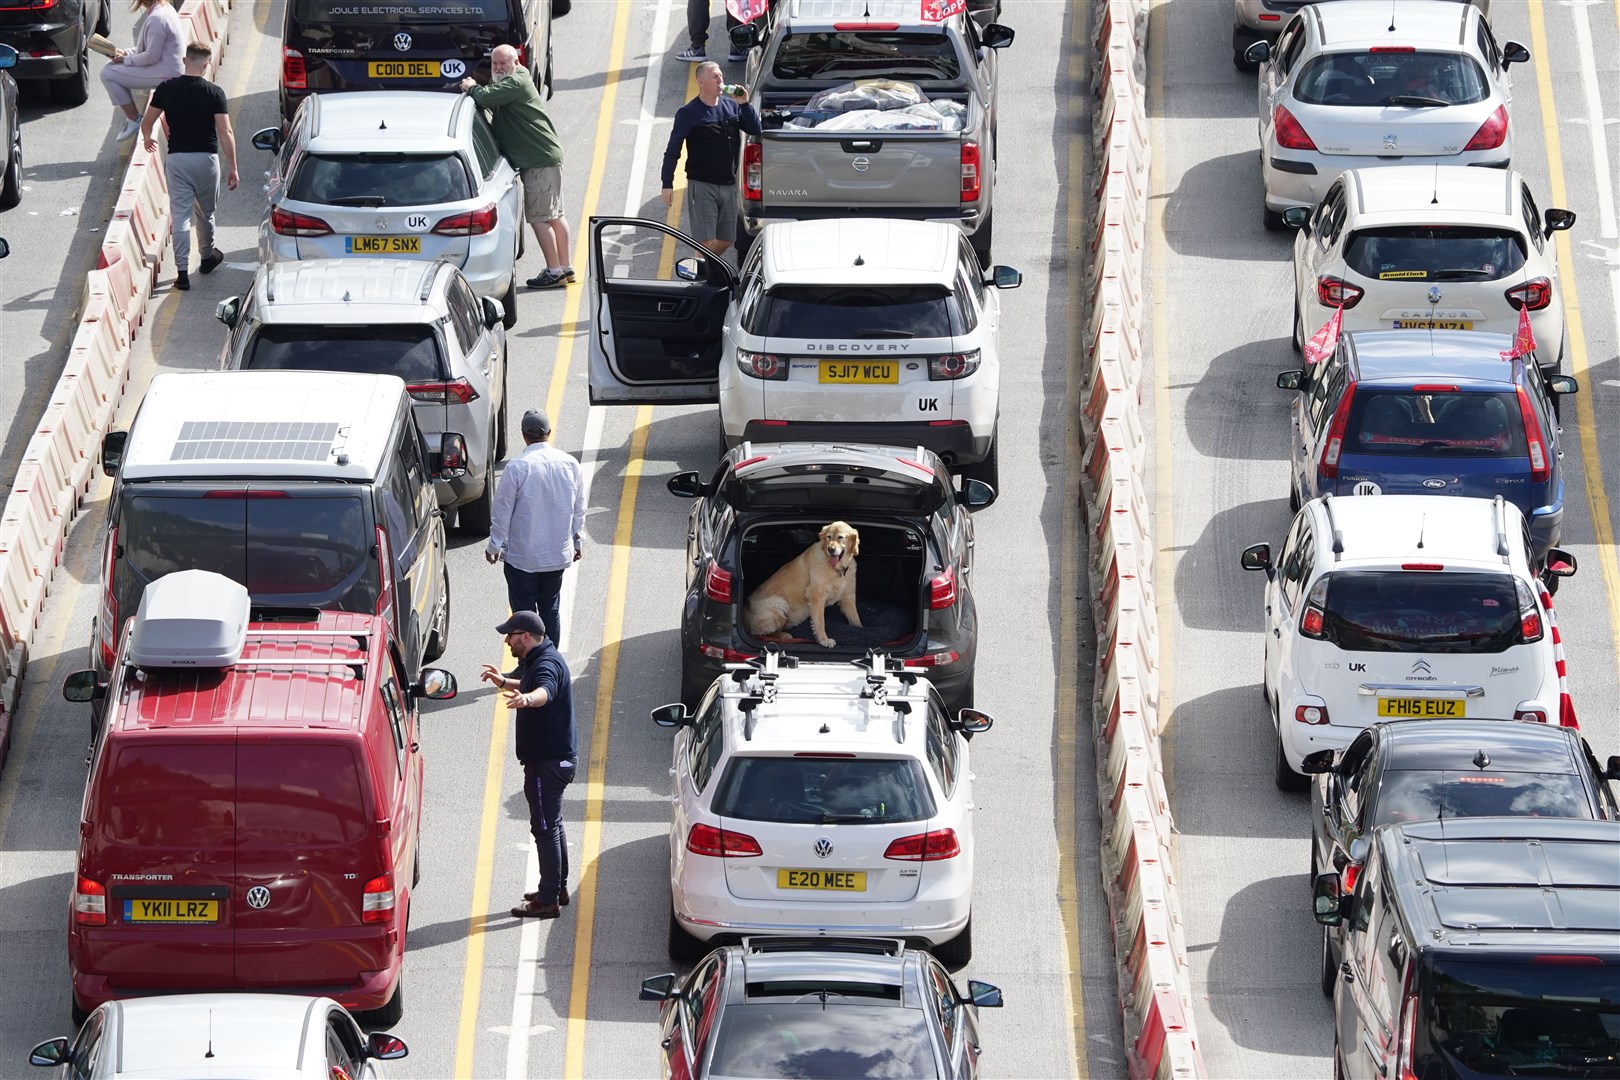 Passengers reported waiting for three hours to board ferries (Gareth Fuller/PA)